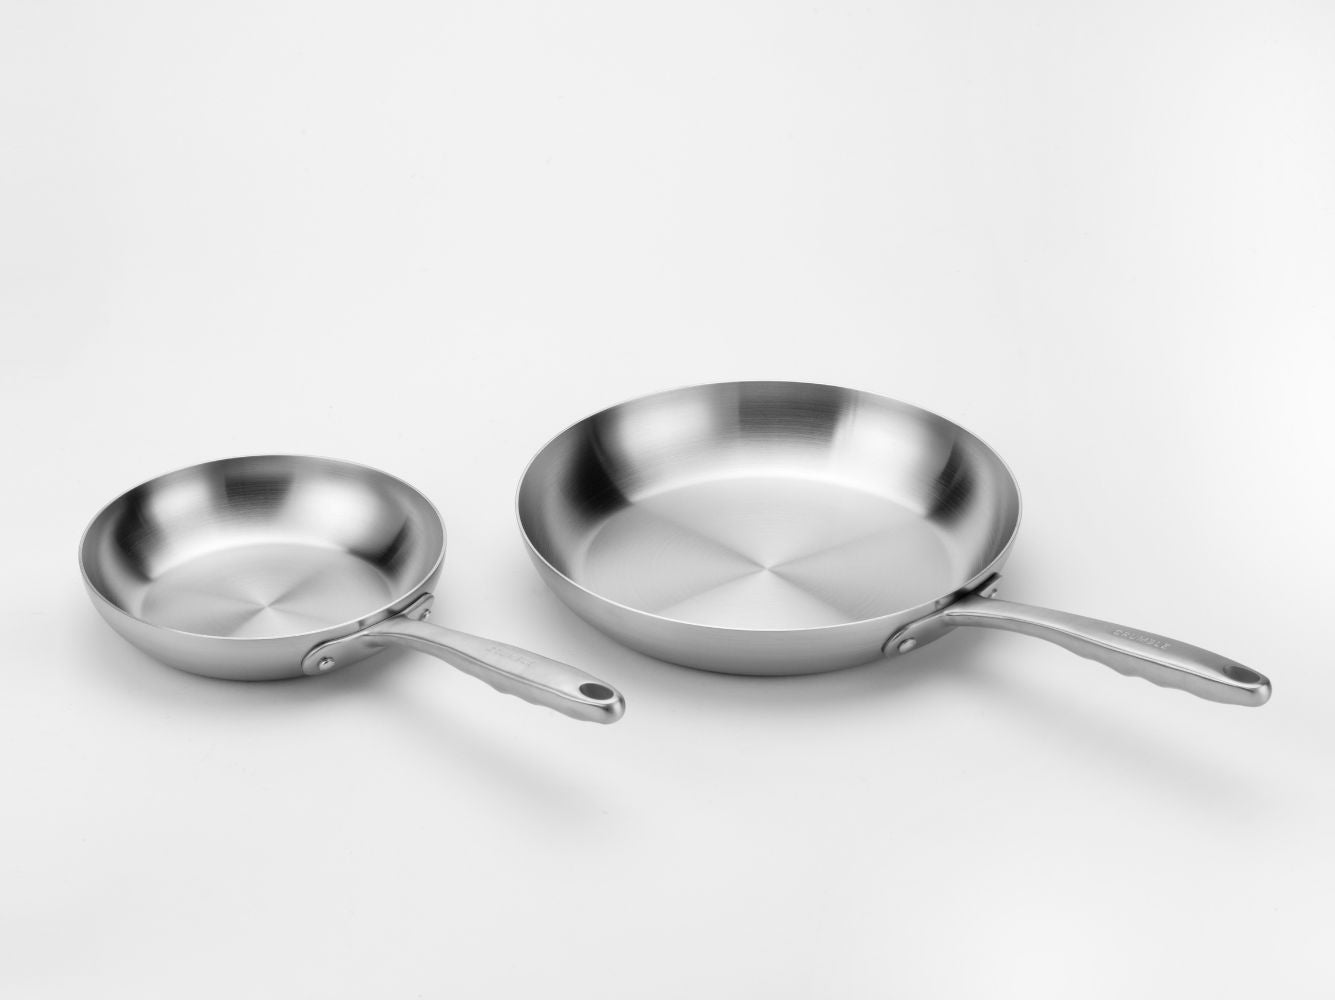 Duo Fry Stainless Steel Set